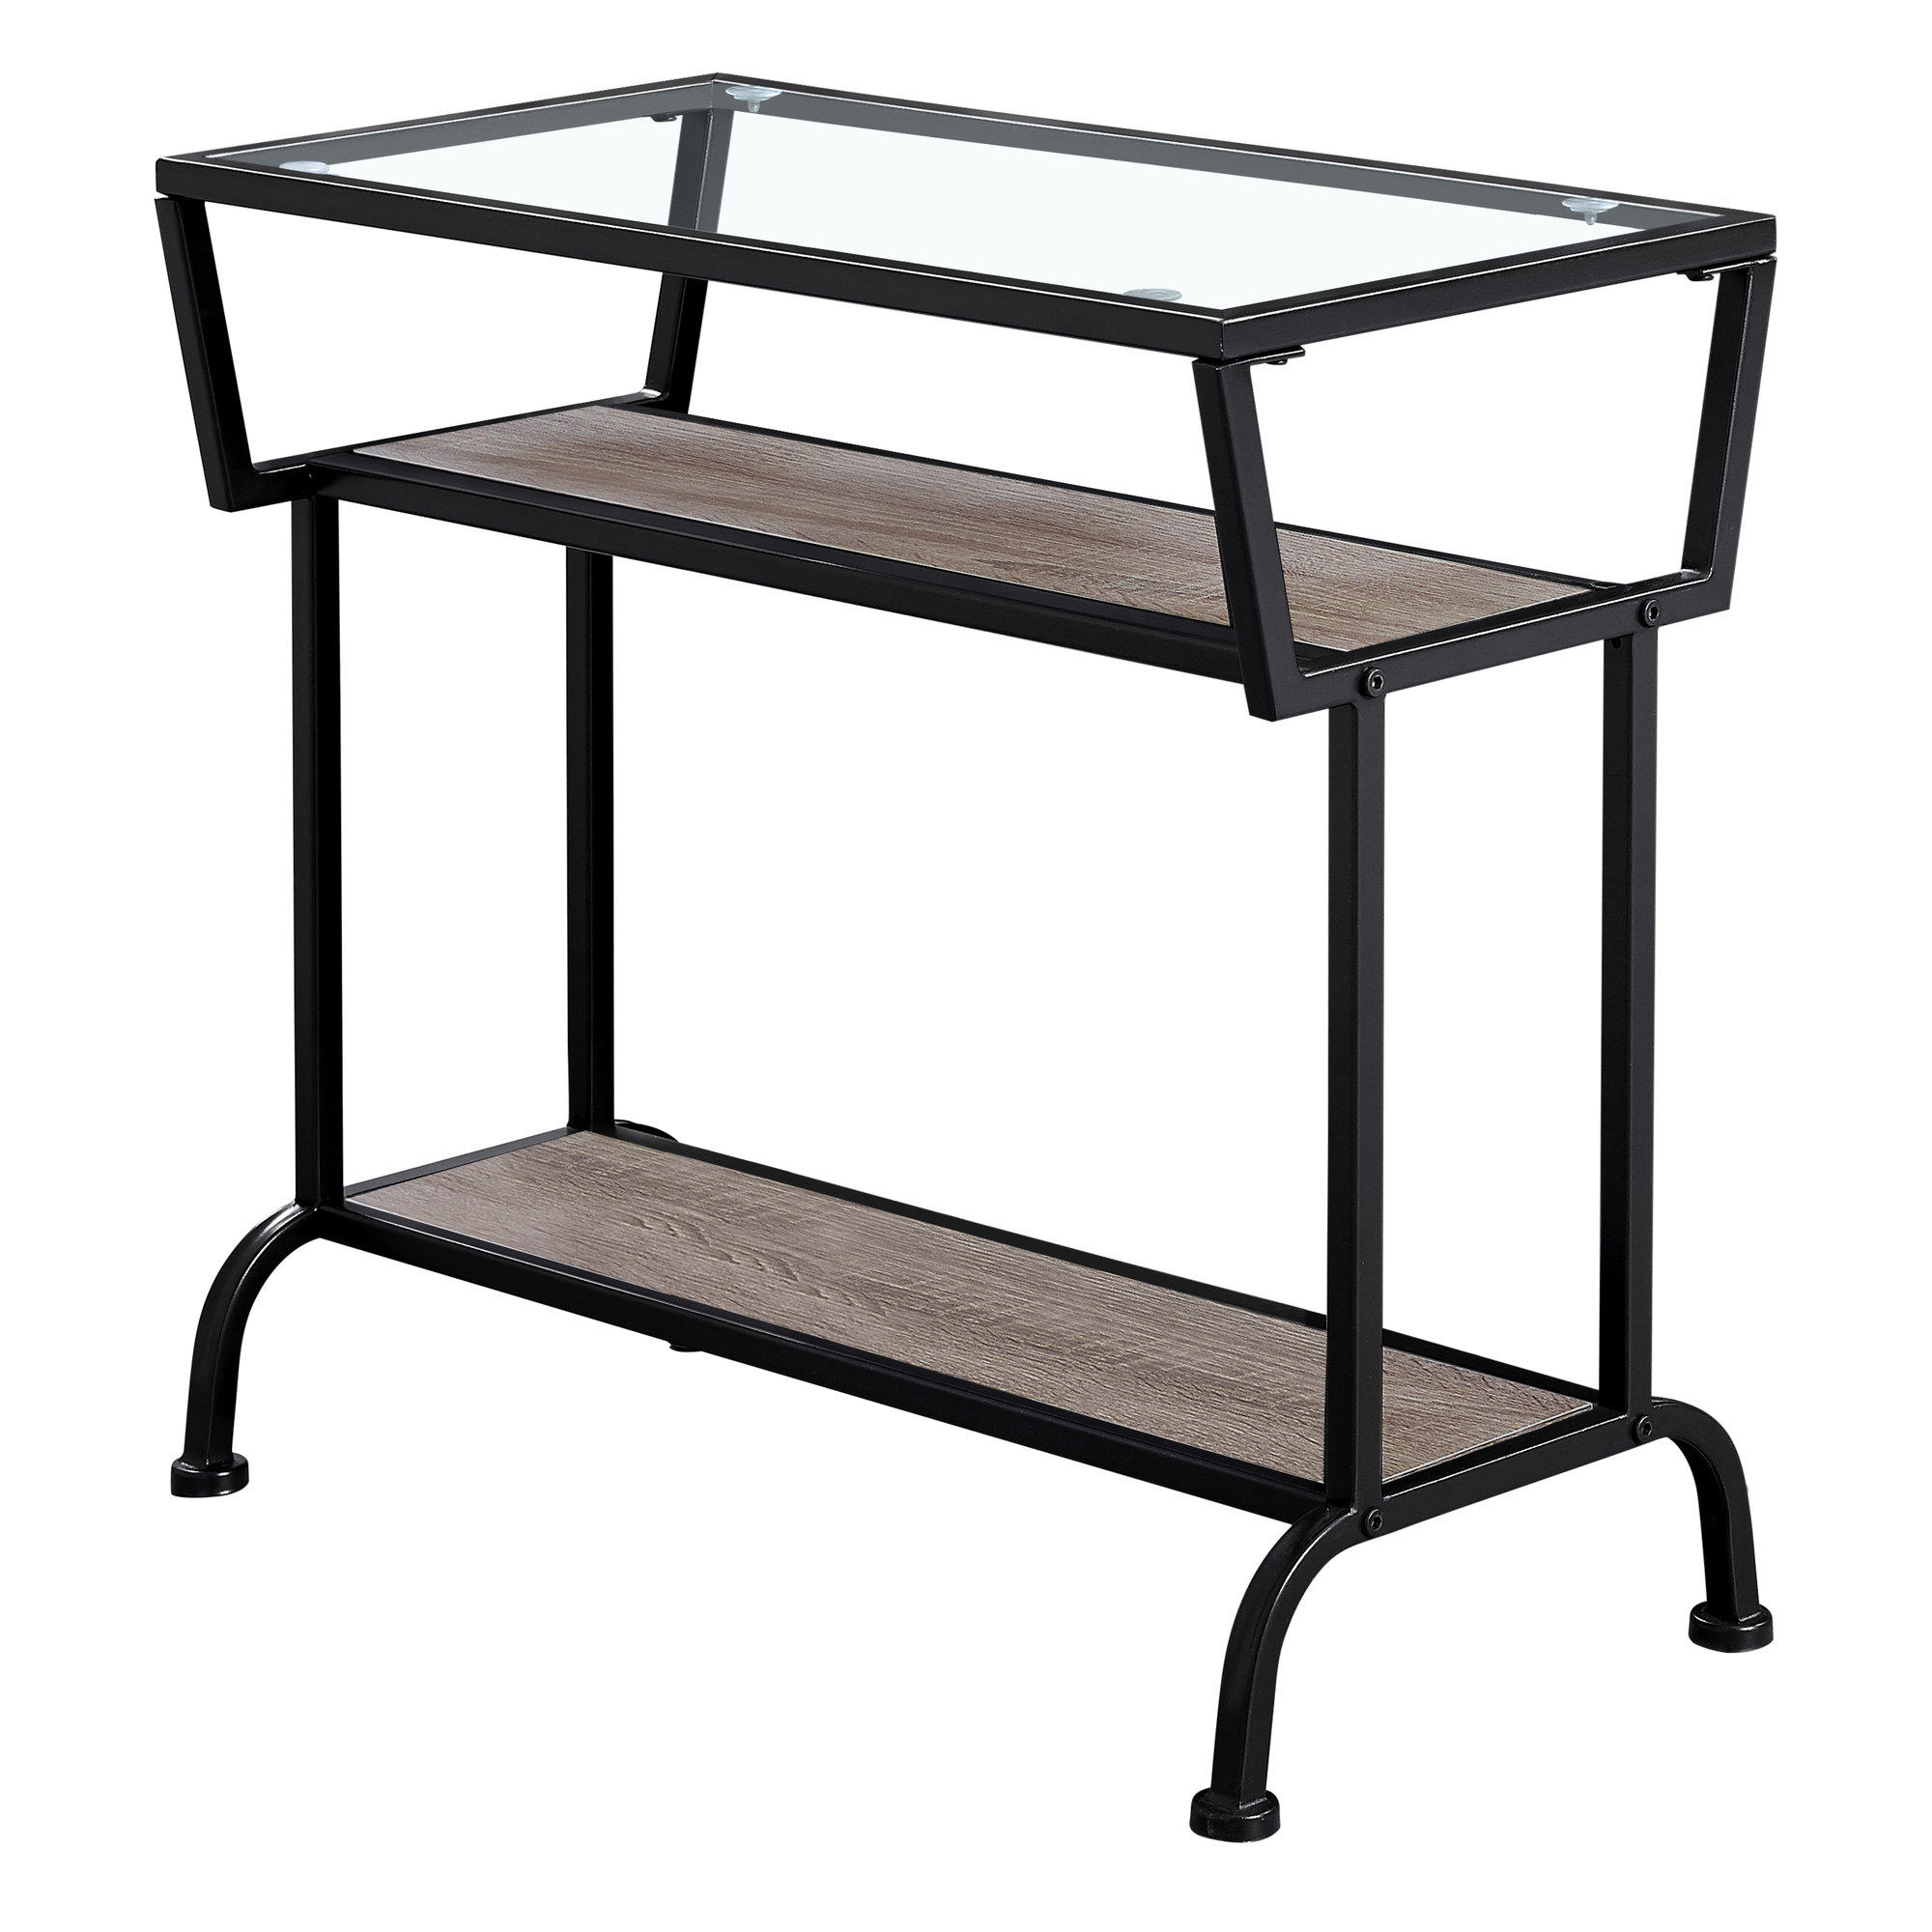 12" x 24" x 22" Dark Taupe with Black Coated Metal and Clea Tempered Glass Accent Table